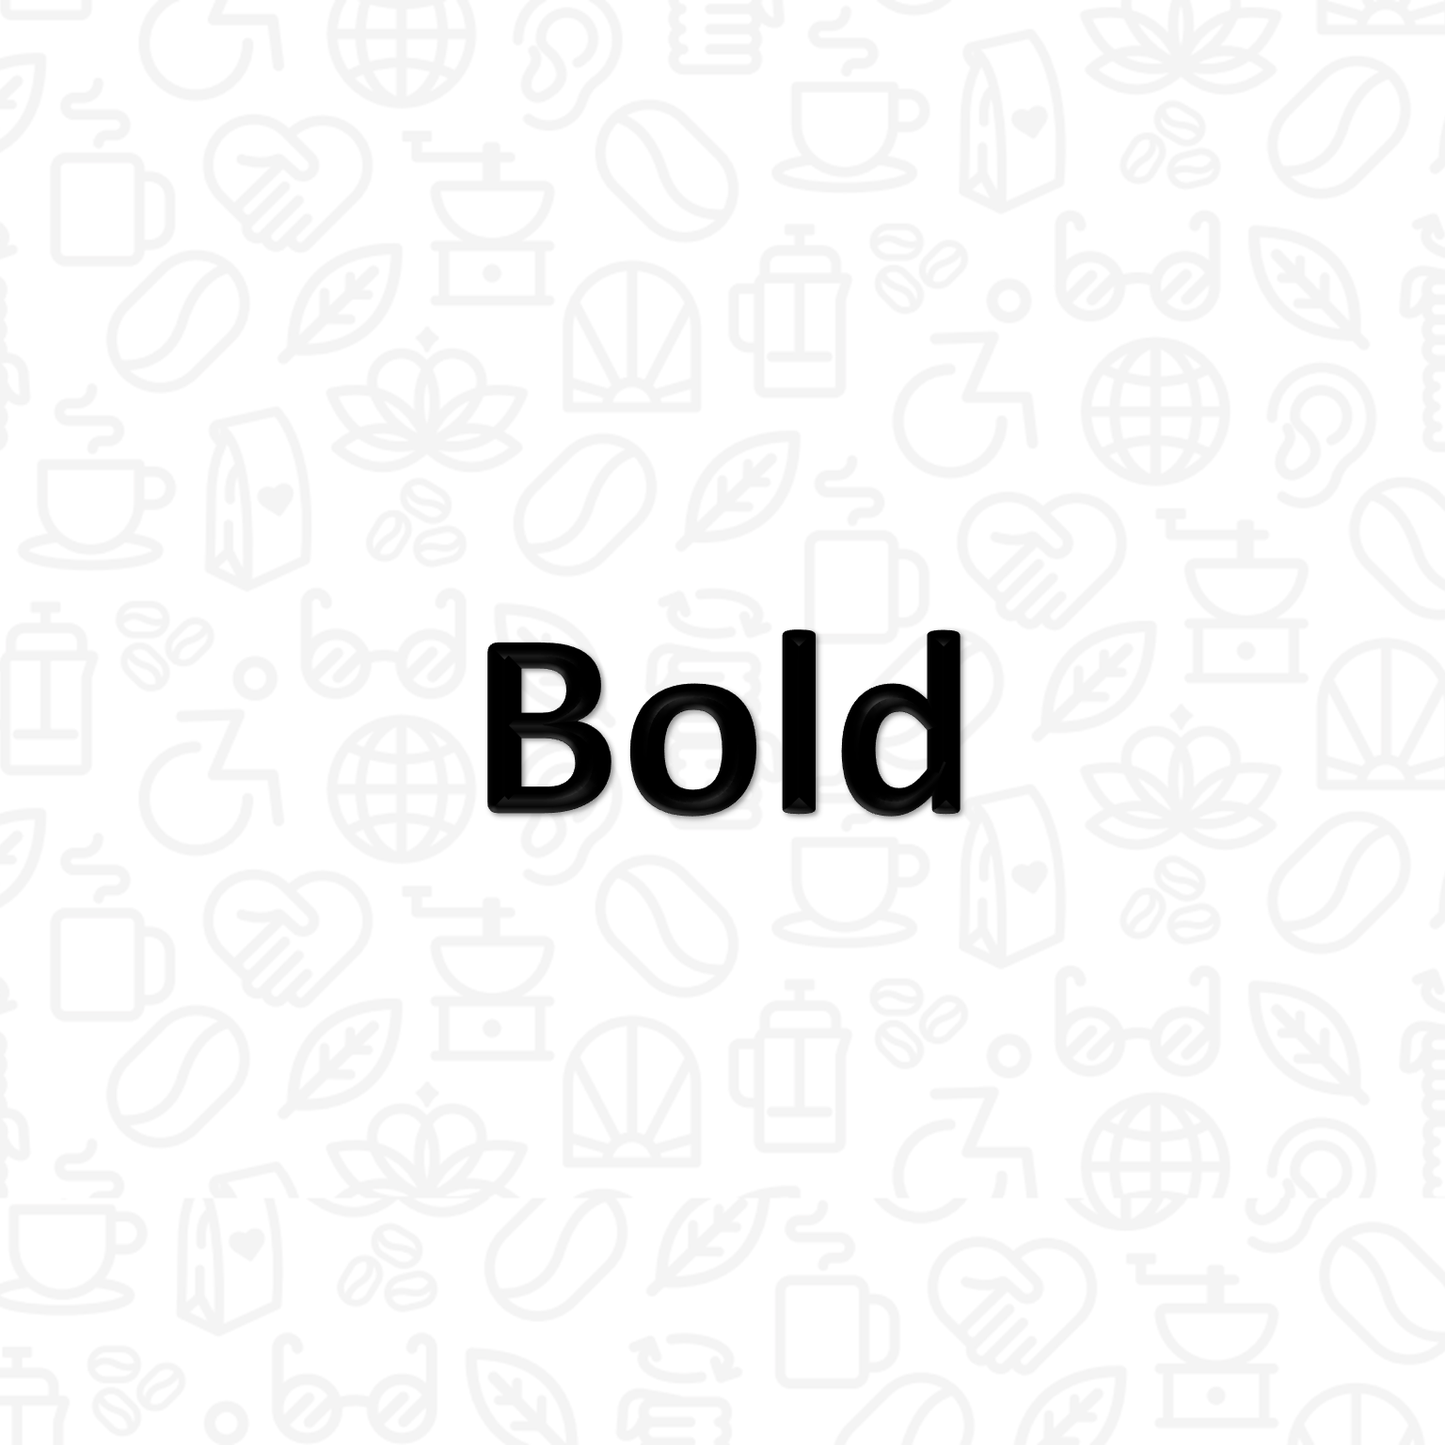 The word "Bold" on a background covered with coffee and disability icons in line art